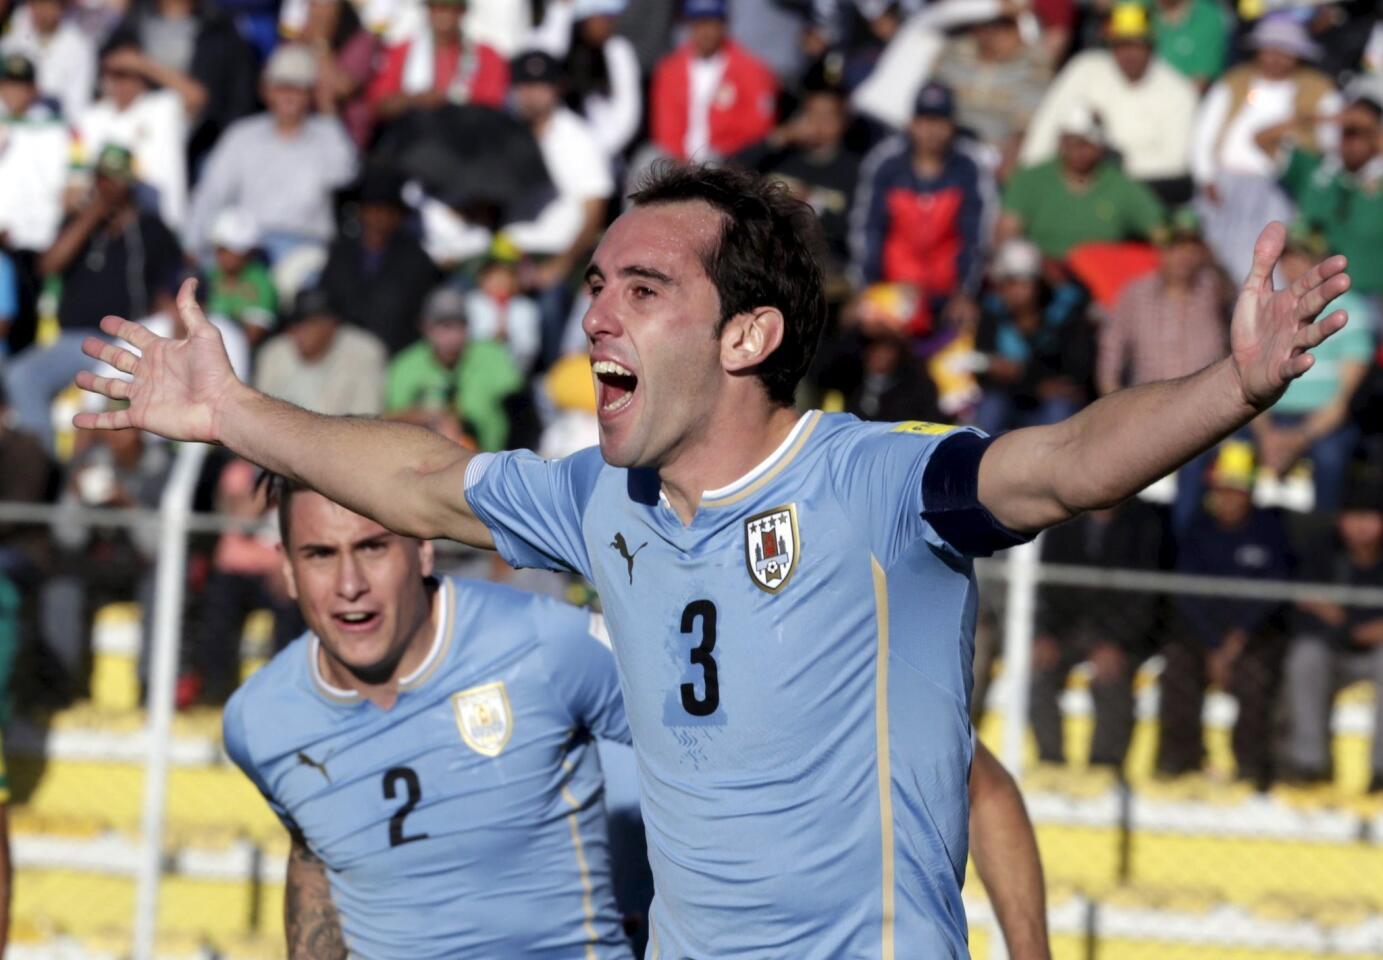 Diego Godin of Uruguay celebrates with teammates after scoring against Bolivia during their 2018 World Cup qualifying soccer match in La Paz